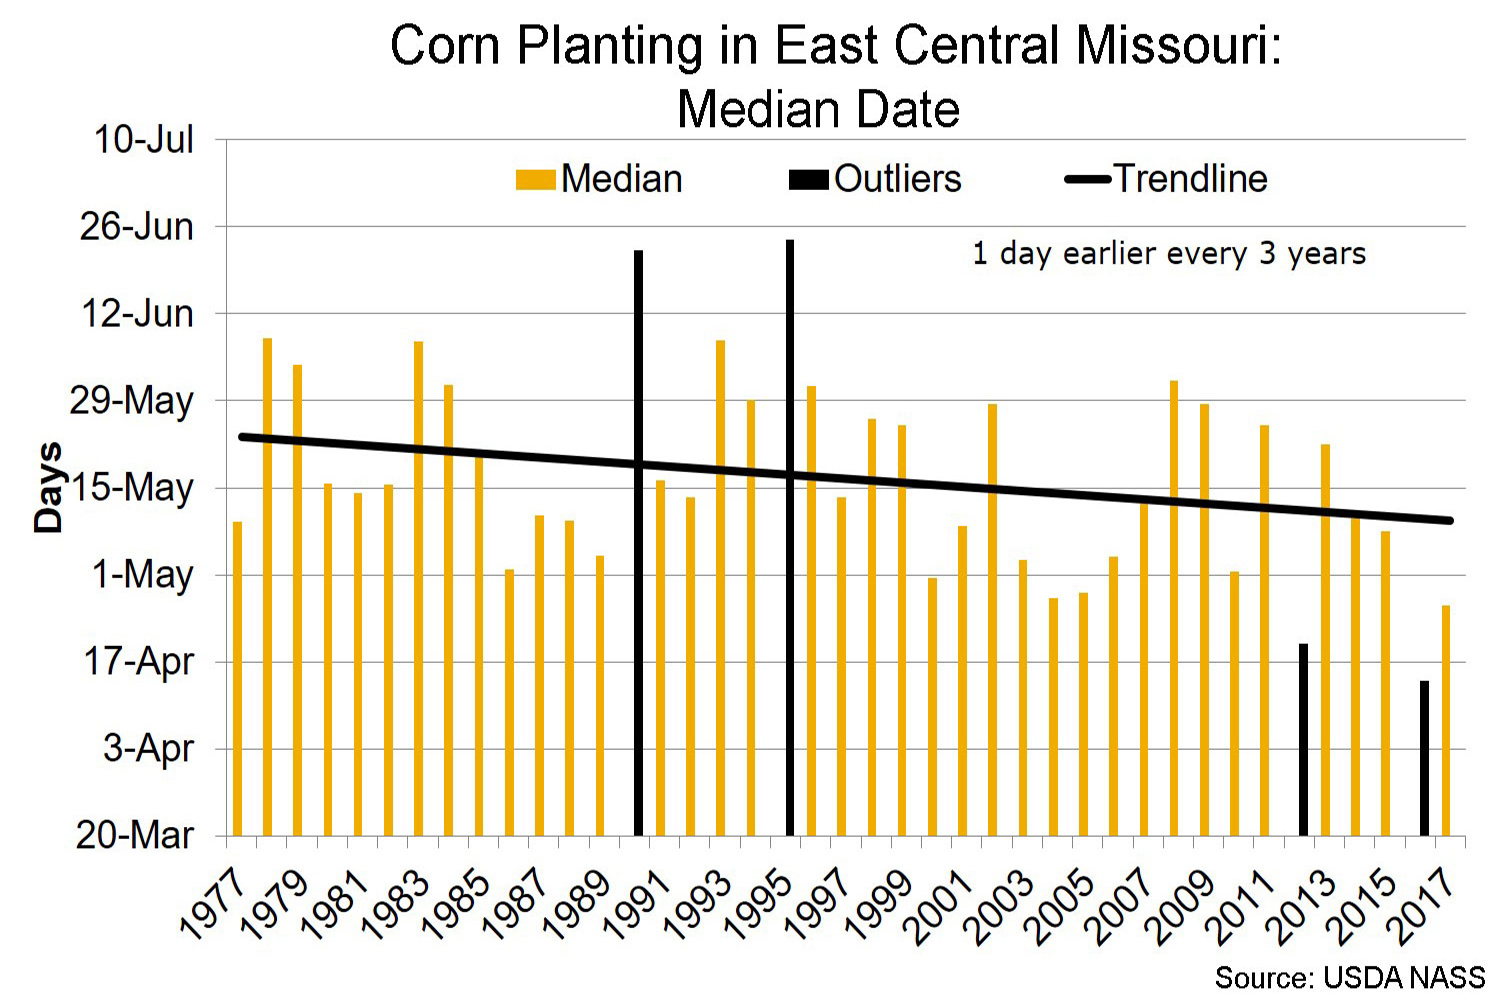 Corn planting in east central Missouri median date chart